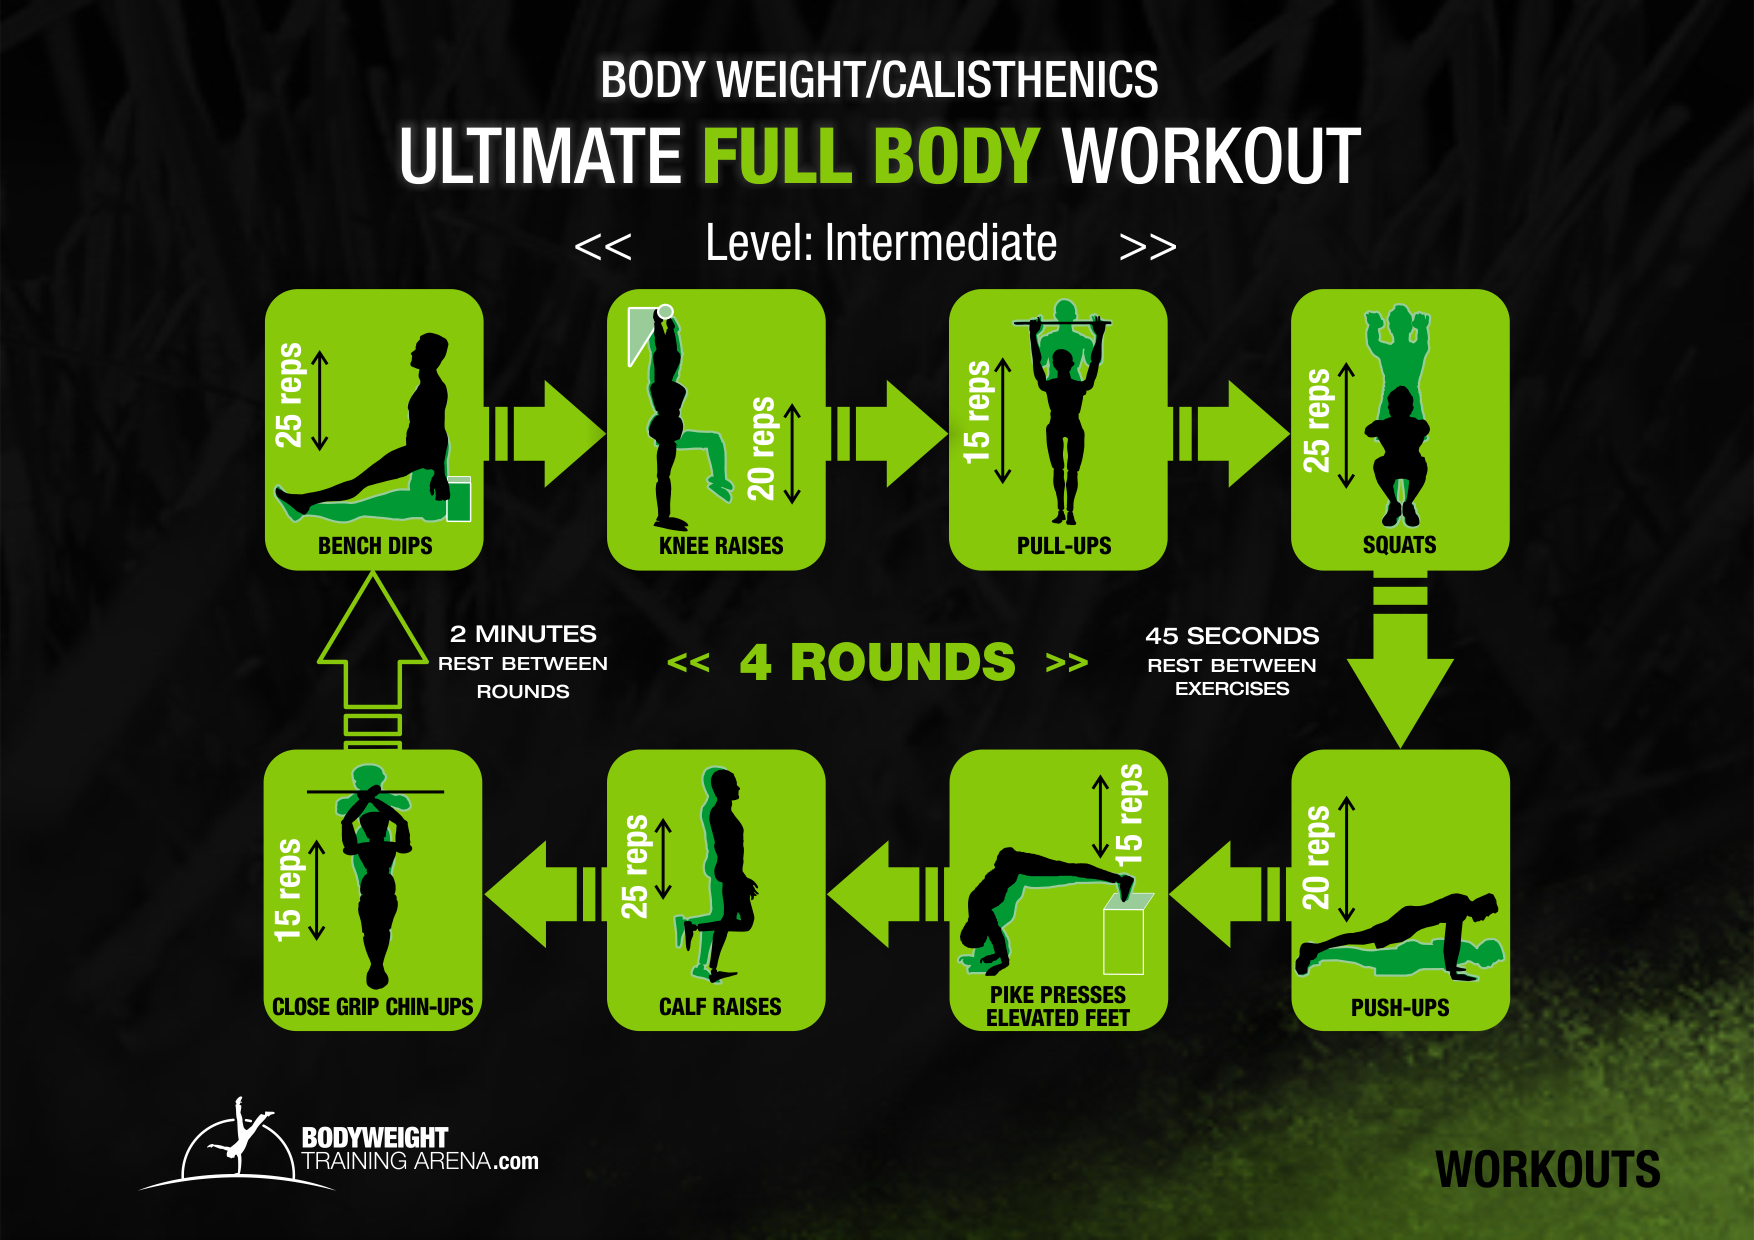 Download Full Body Workout Bodyweight Exercises Pics Full Body Workout Beginner